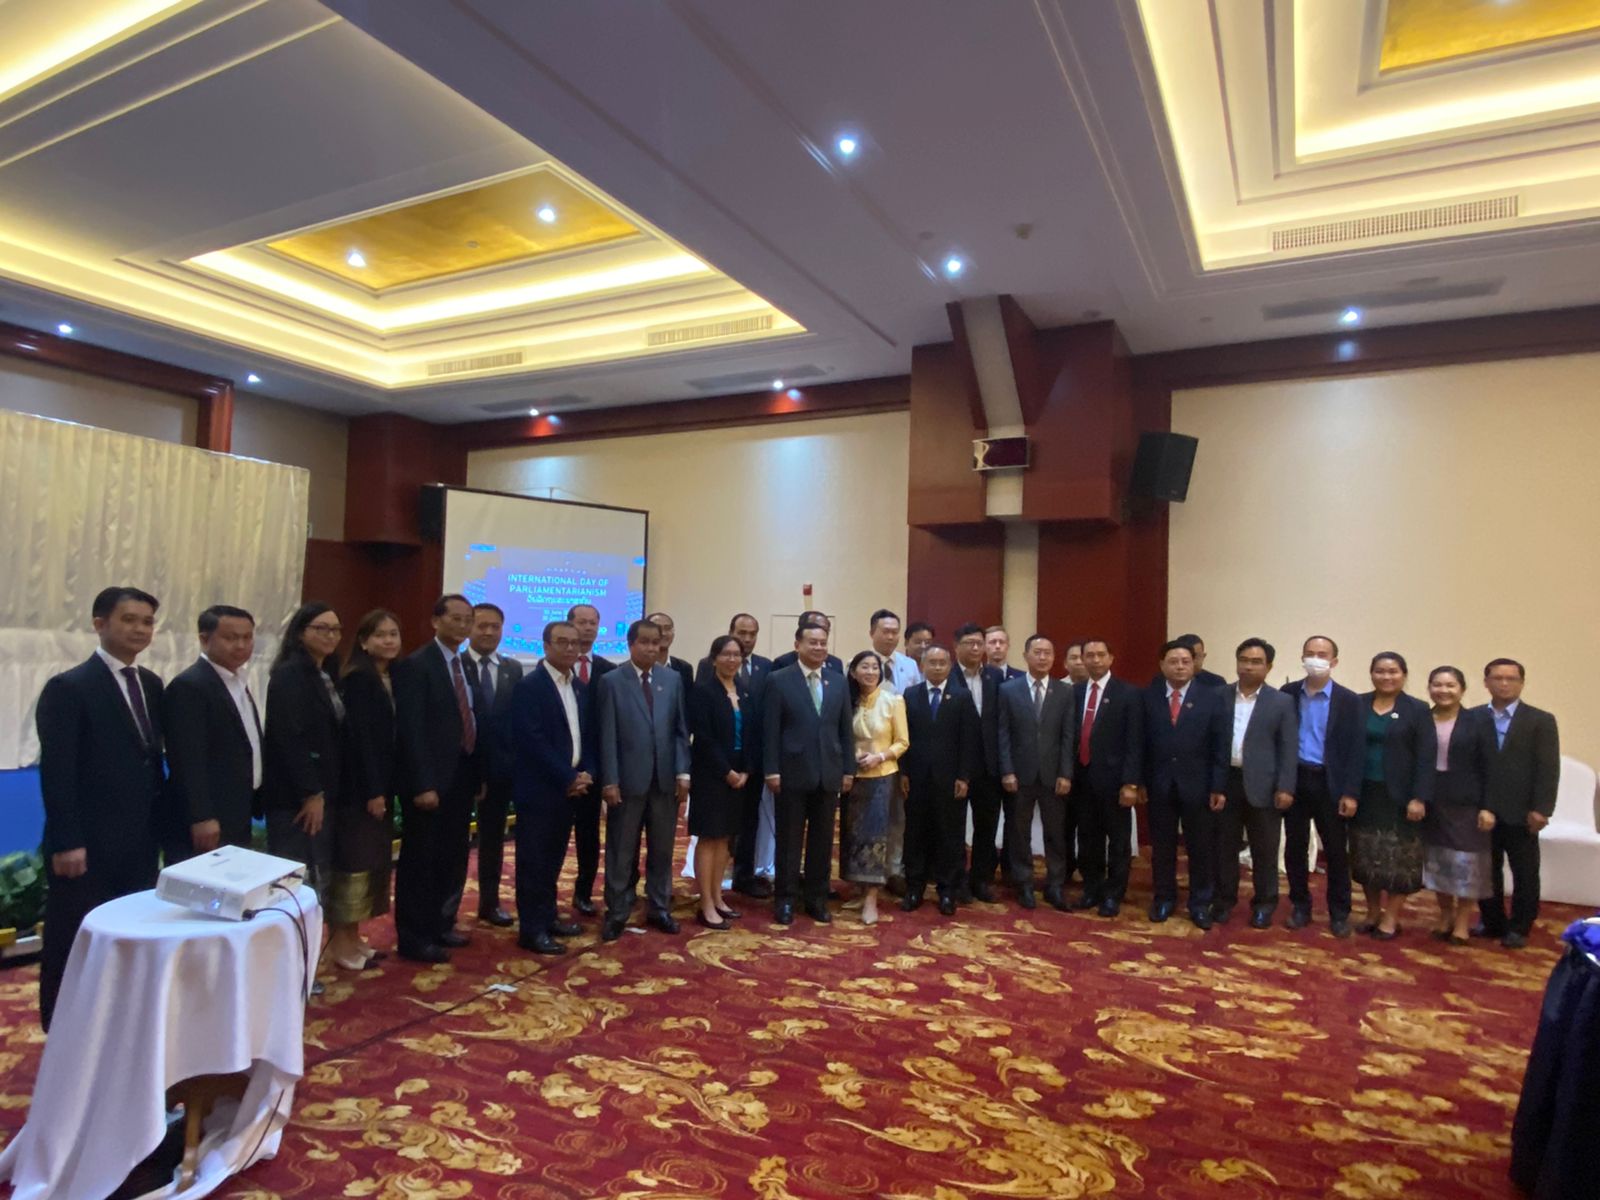 all participants posing for group photo at the IPU networking event